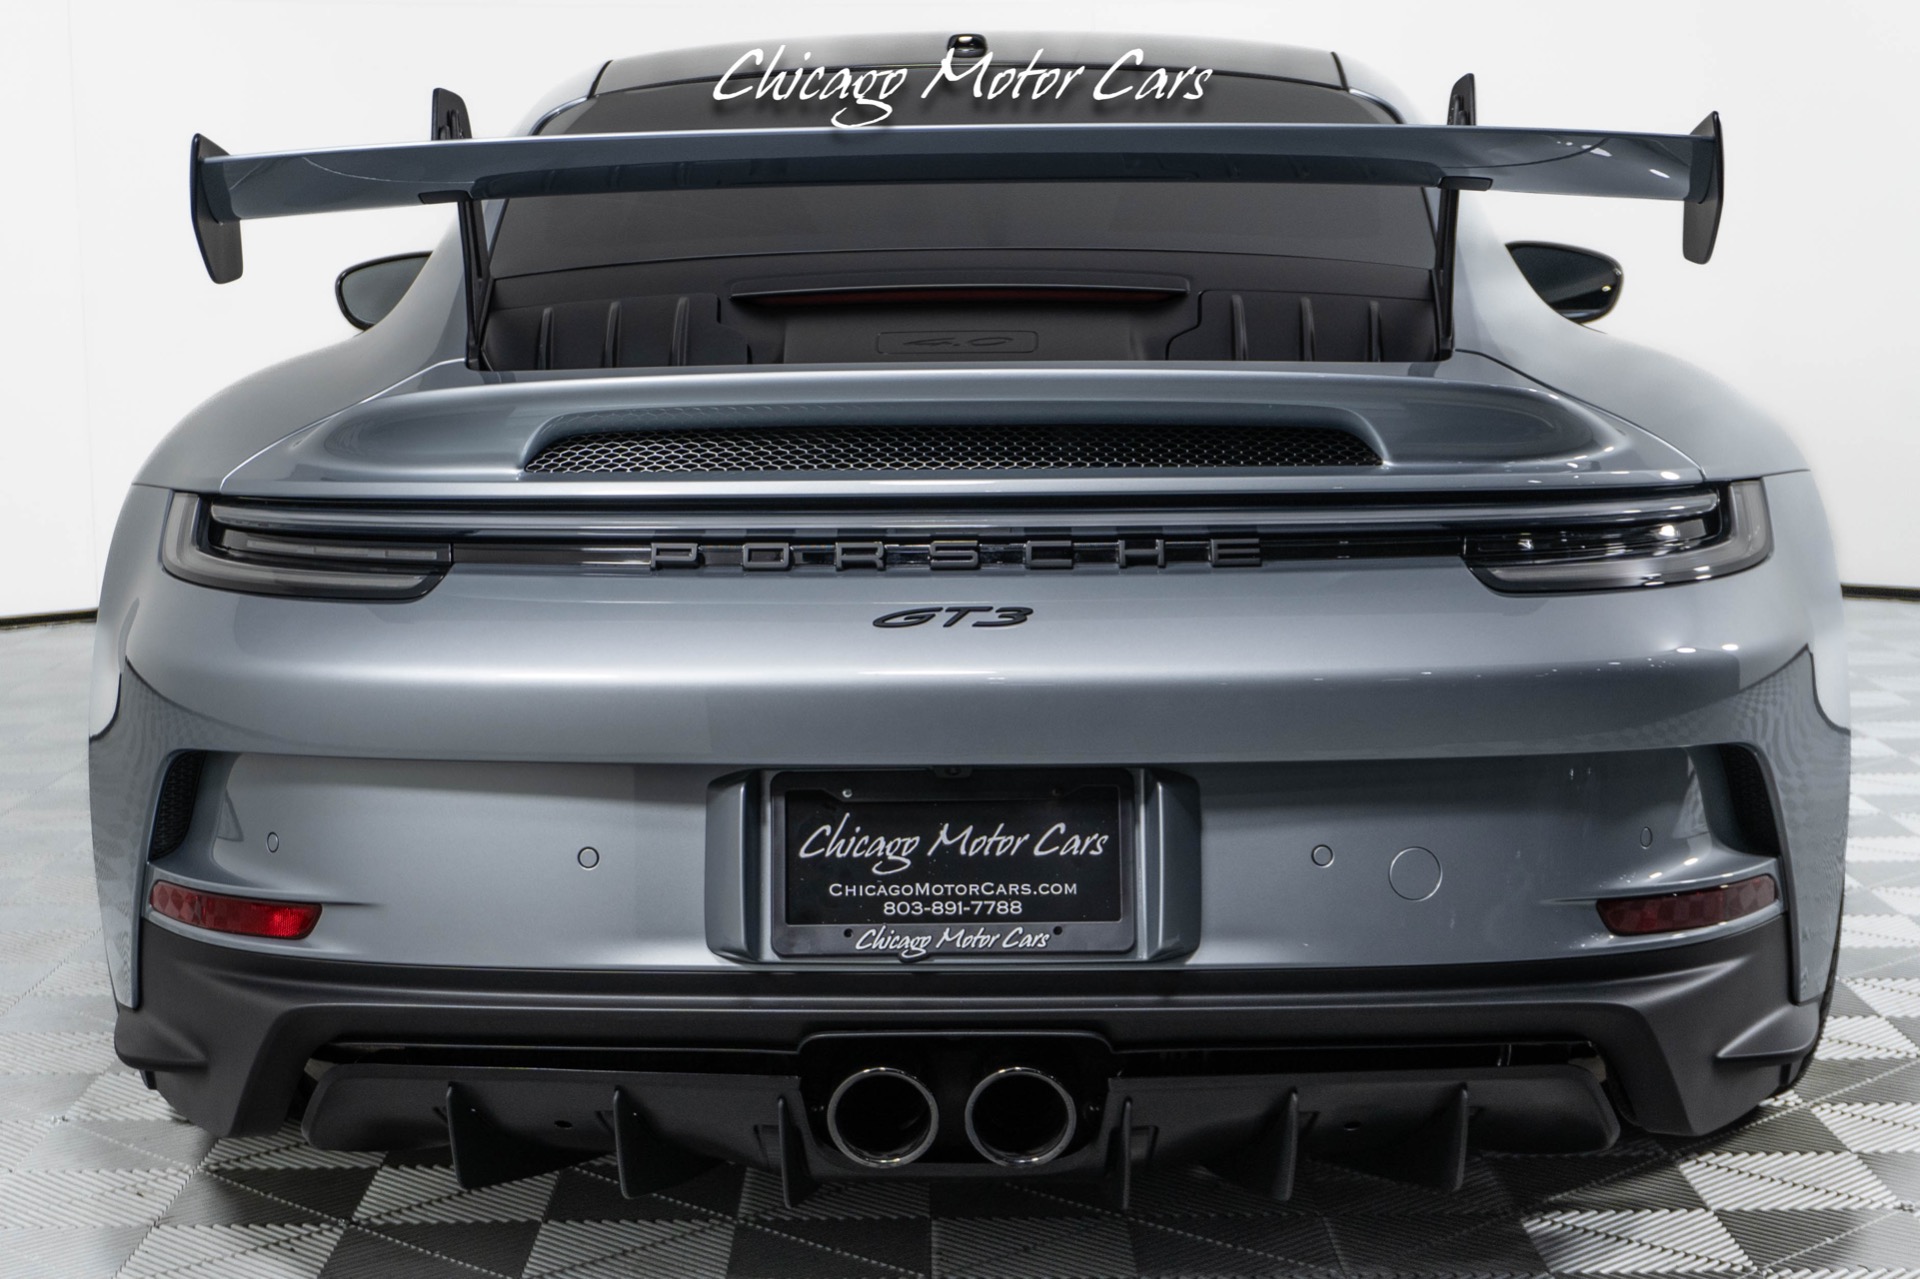 Used-2022-Porsche-911-GT3-Coupe-Front-End-Lifter-Carbon-Ceramic-Brakes-Front-End-PPF-Loaded